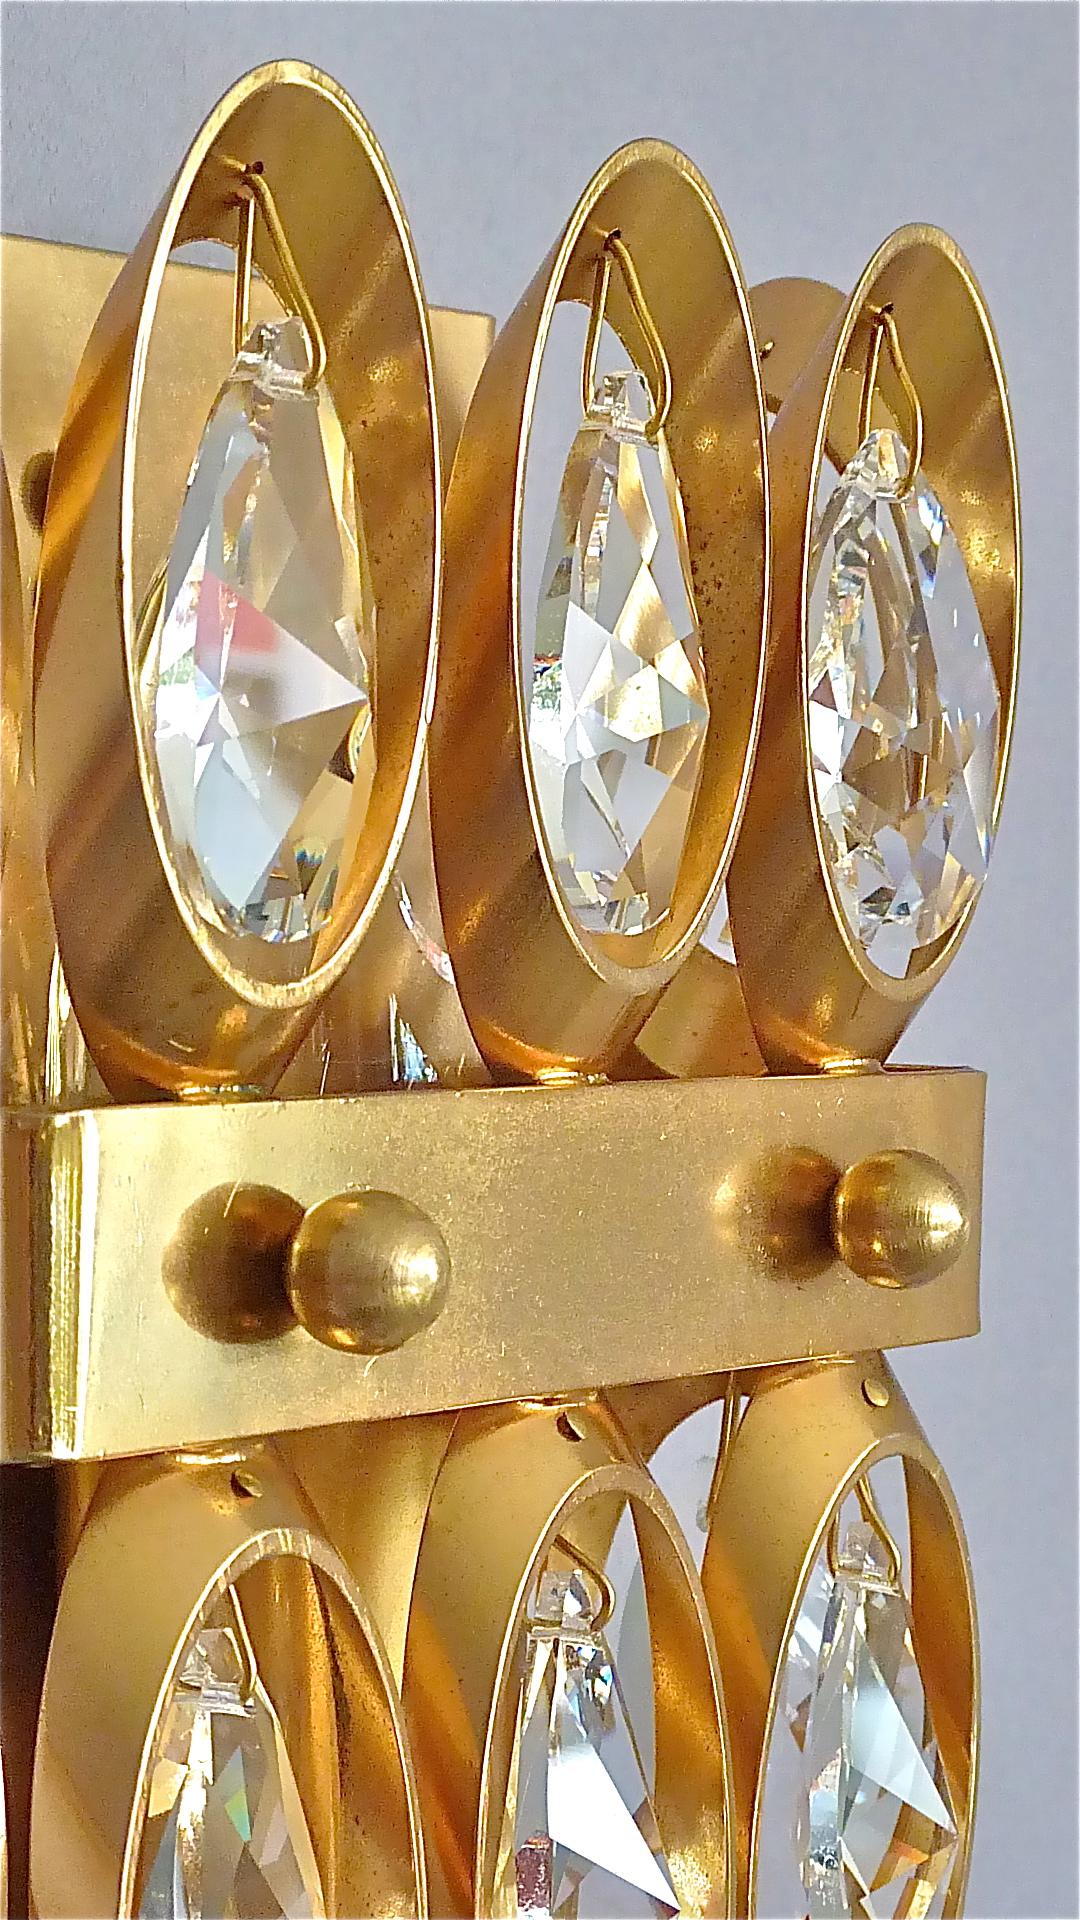 Hollywood Regency Midcentury Lobmeyr or Palwa Gilt Brass Faceted Crystal Glass Sconces 1960s, Pair For Sale